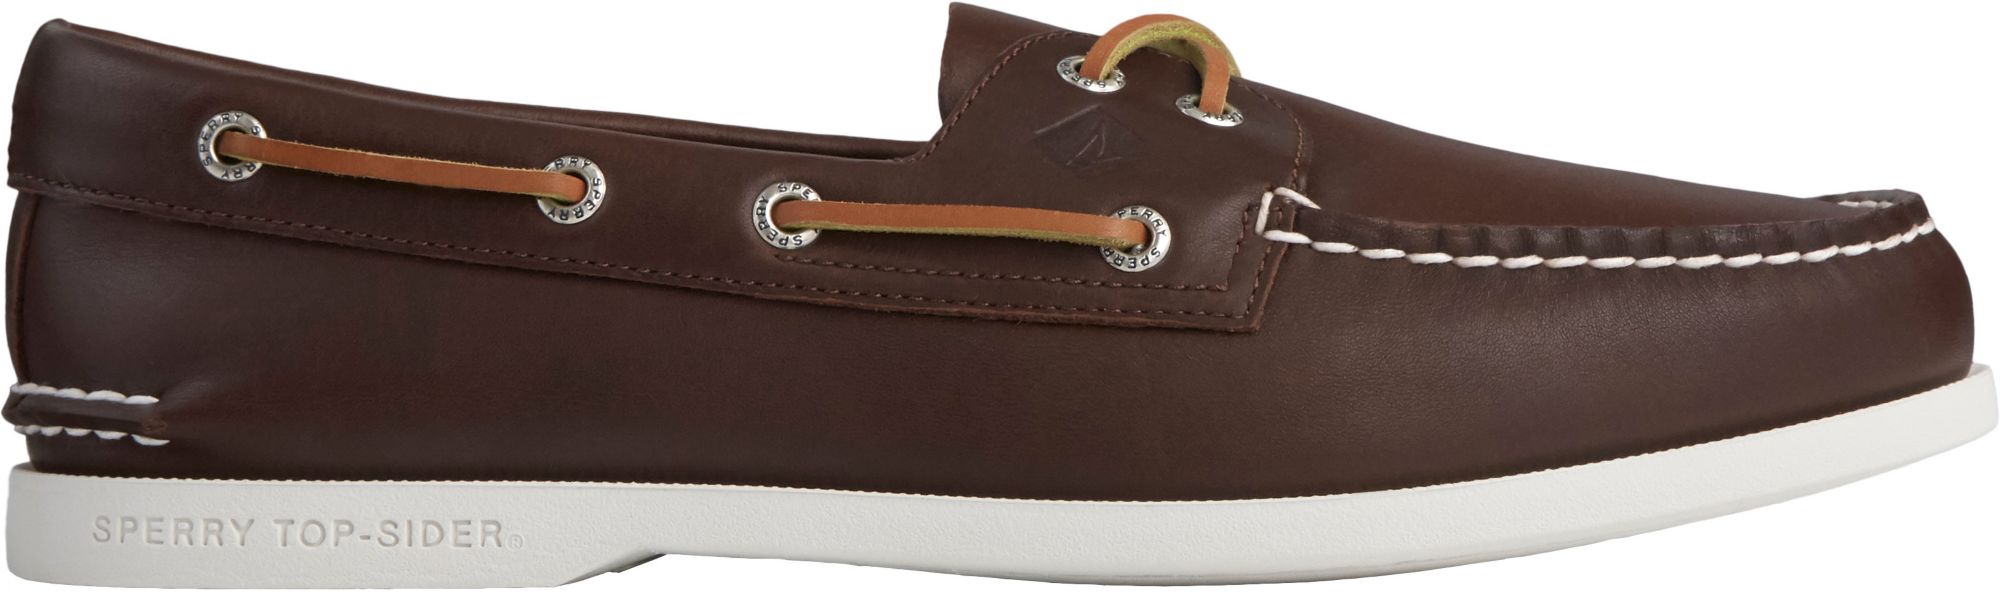 where can i buy sperry shoes near me